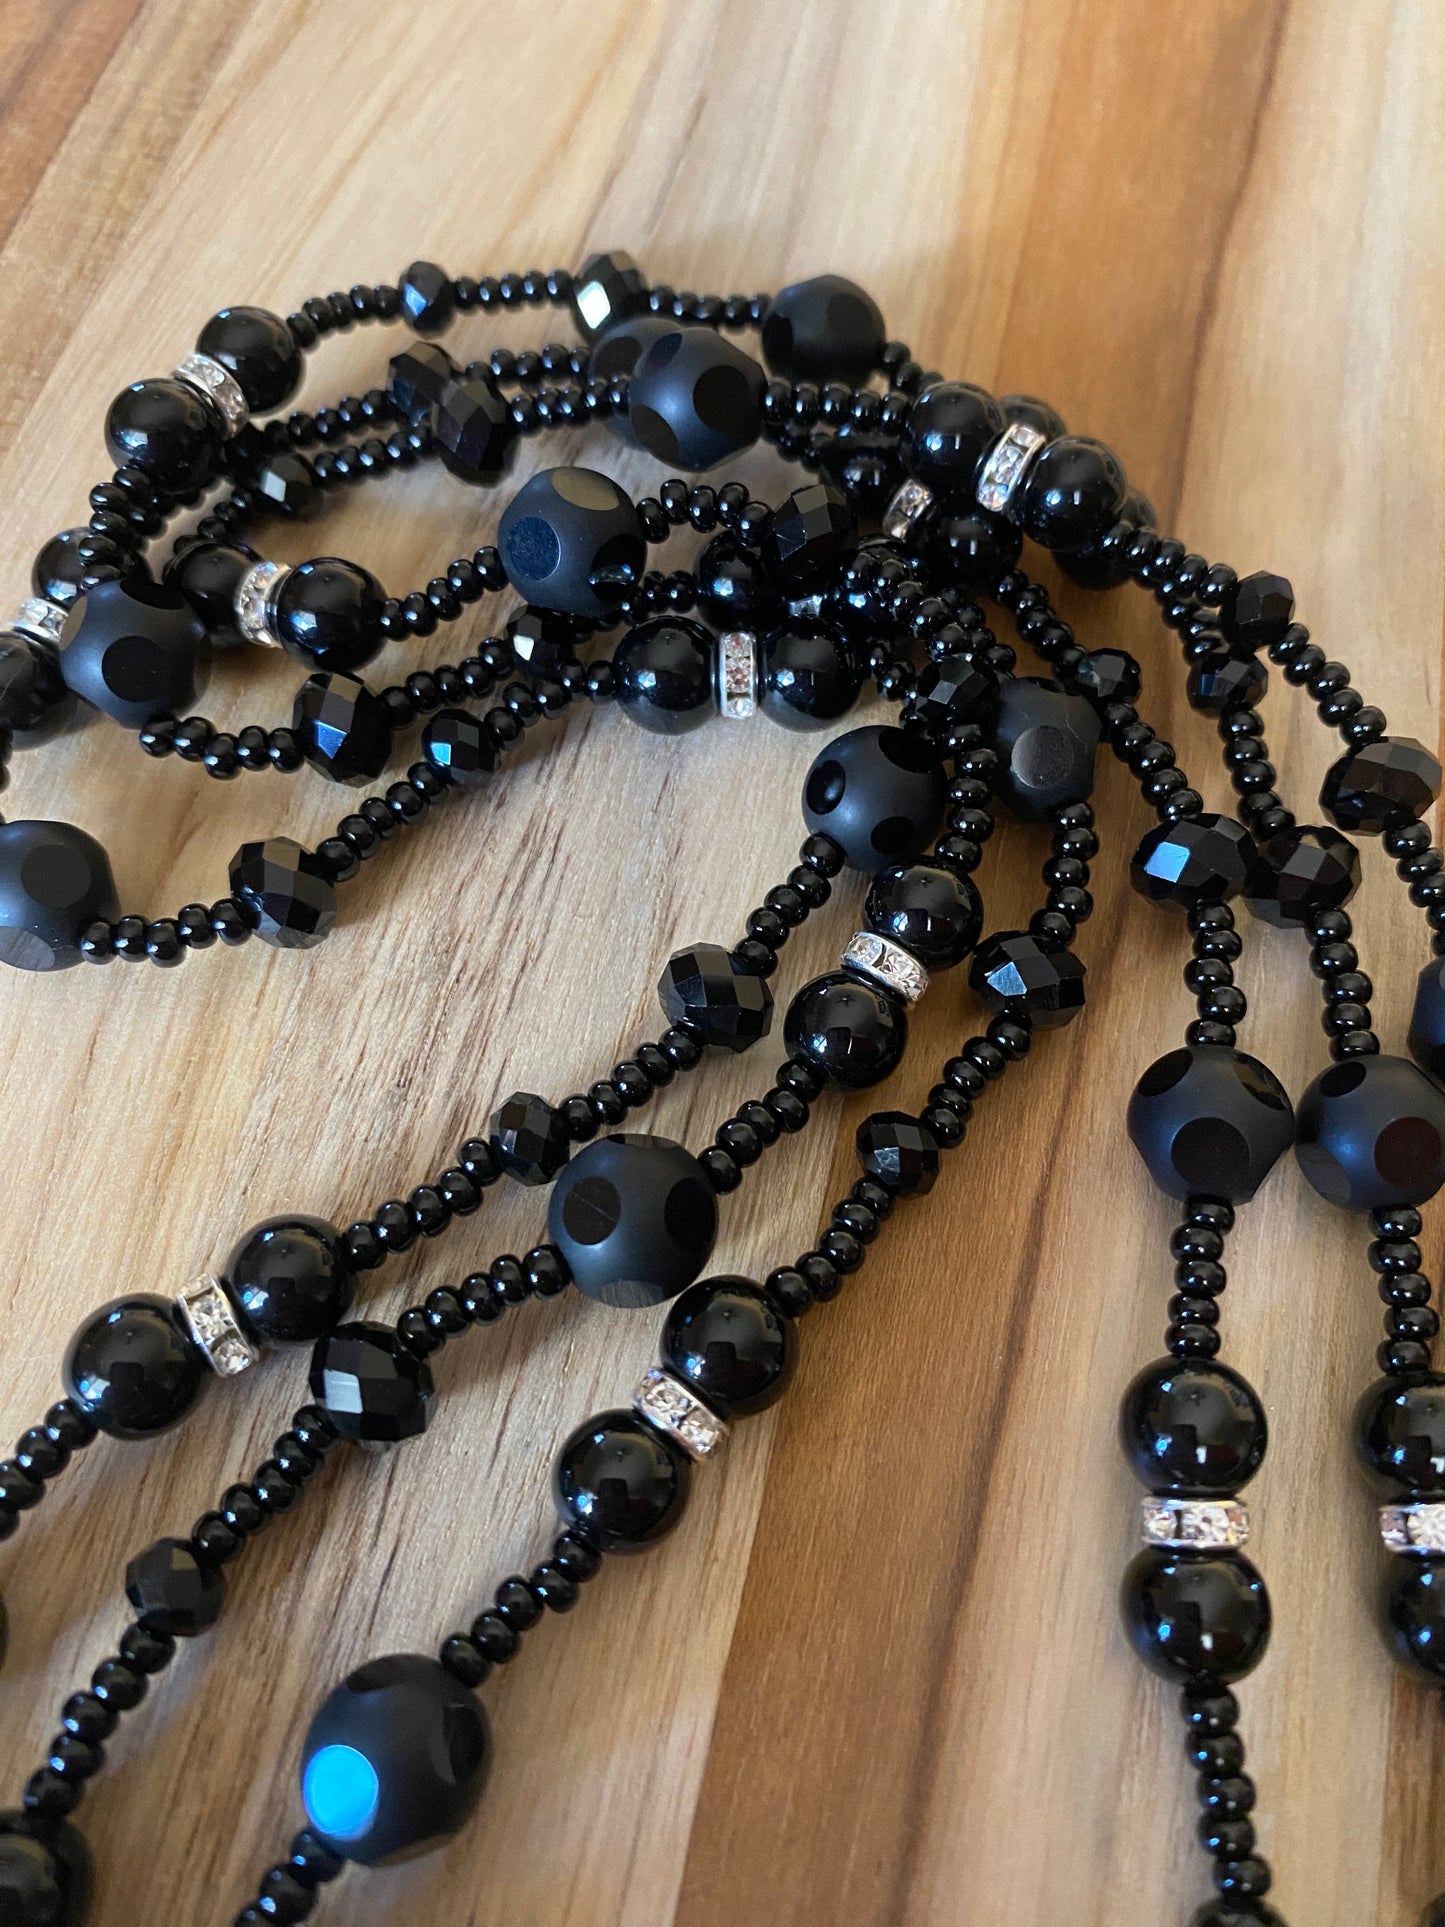 60" Extra Long Wraparound Style Beaded Necklace with Black Onyx and Glass Beads